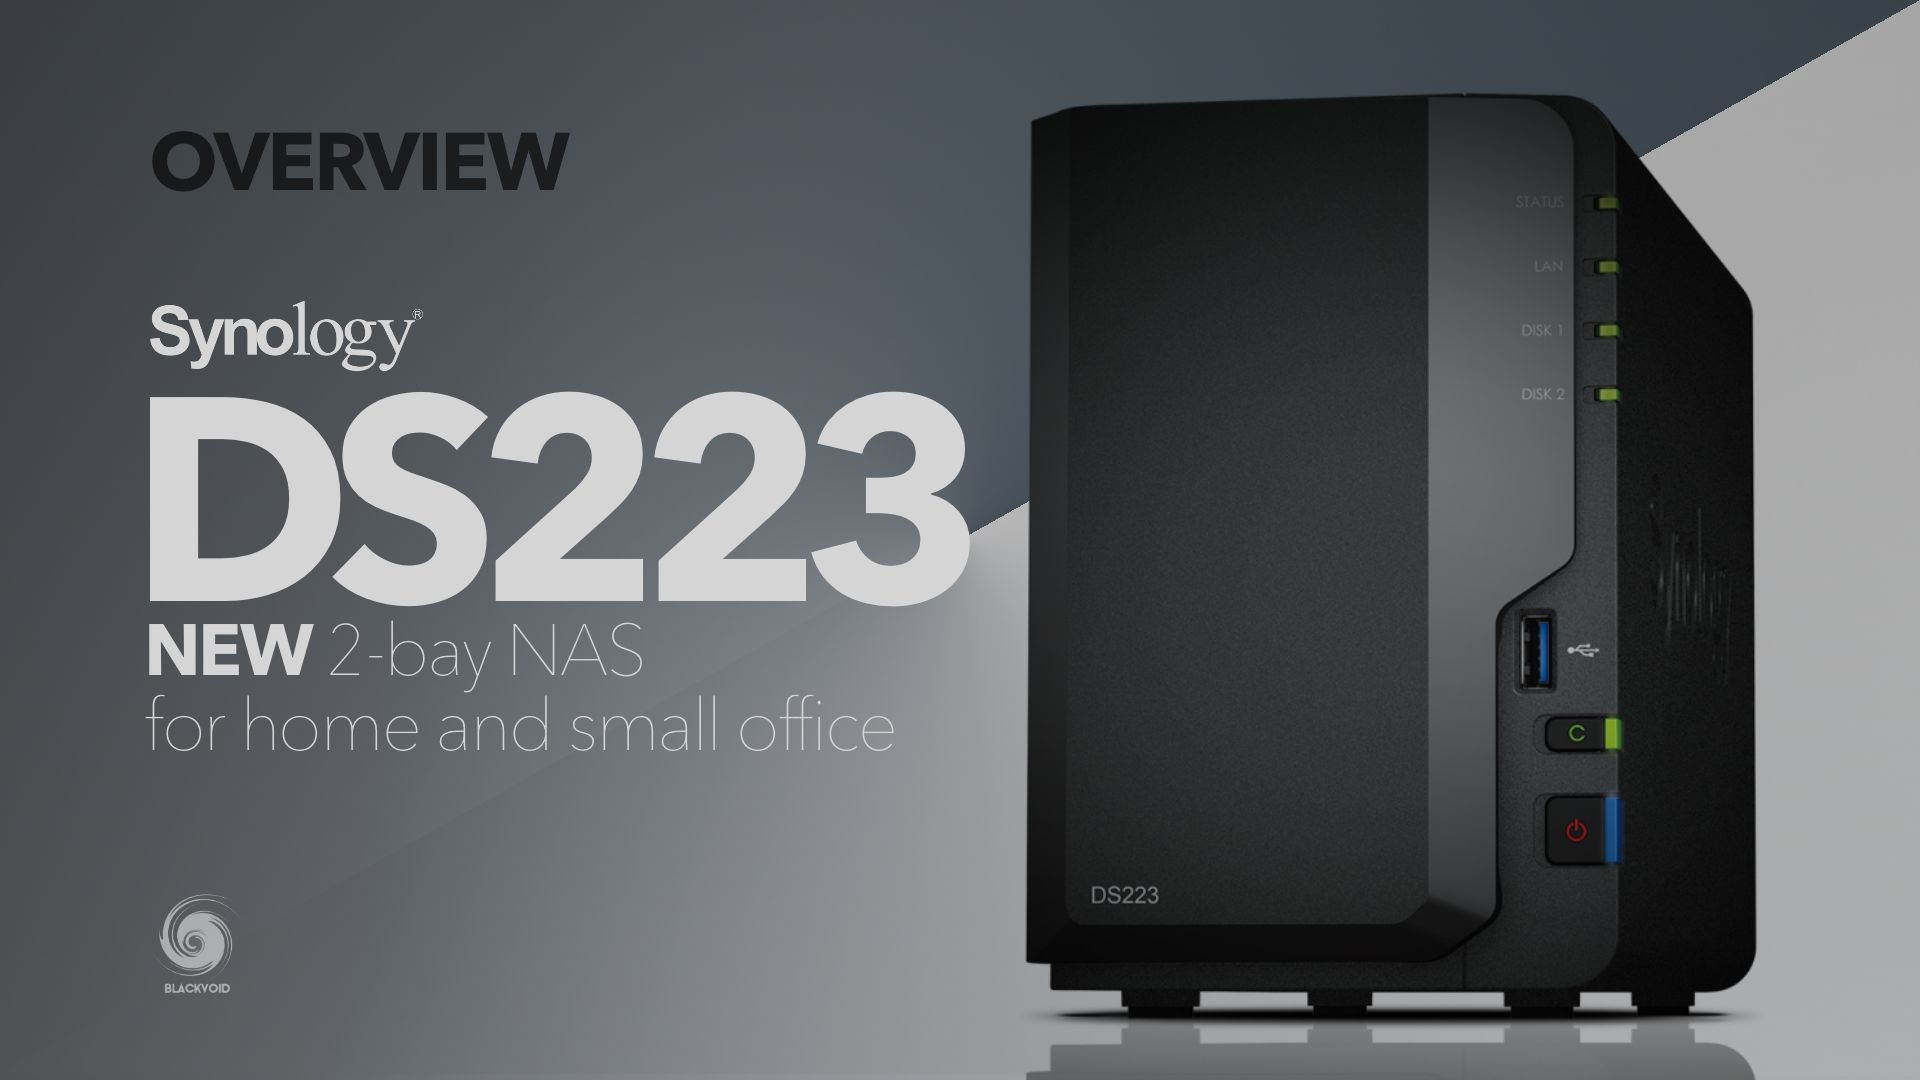 Synology DS223j NAS Revealed – The BEST Value Entry into DSM 7.2? – NAS  Compares